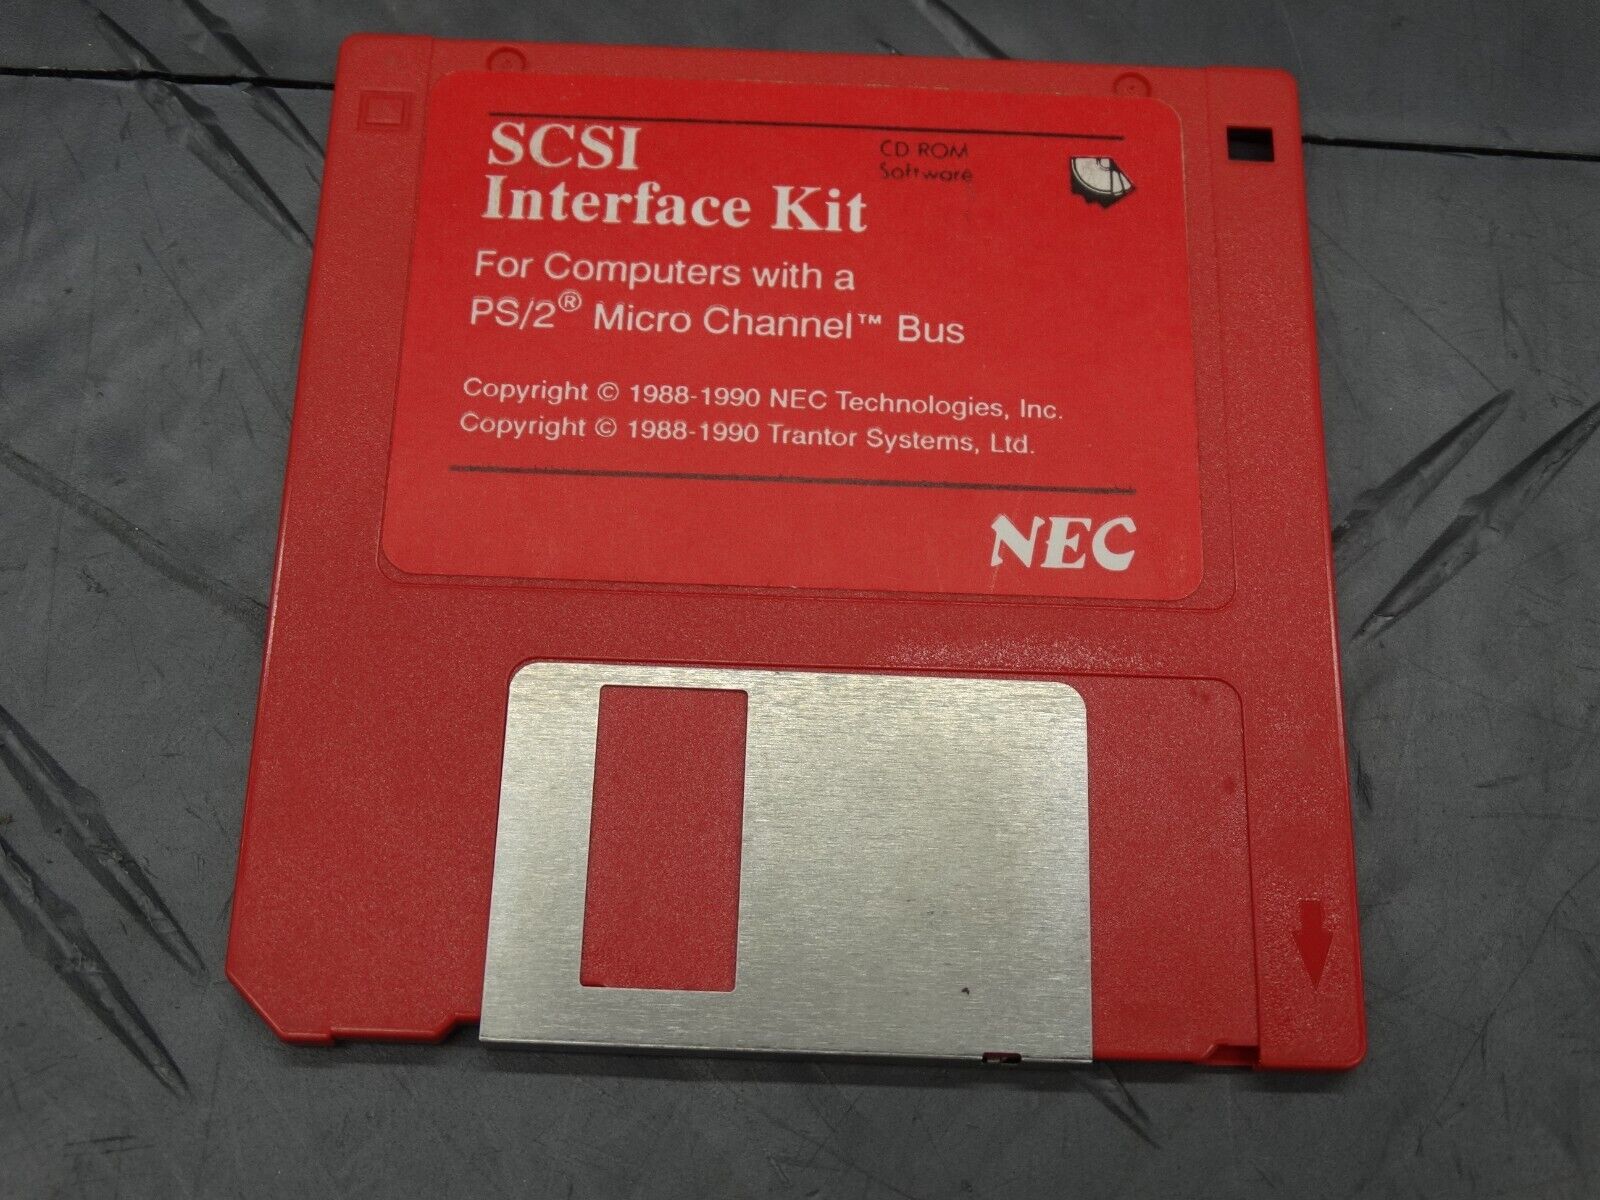 NEC SCSI Interface Kit PS/2 Micro Channel Bus 3.5” Floppy Software Vintage